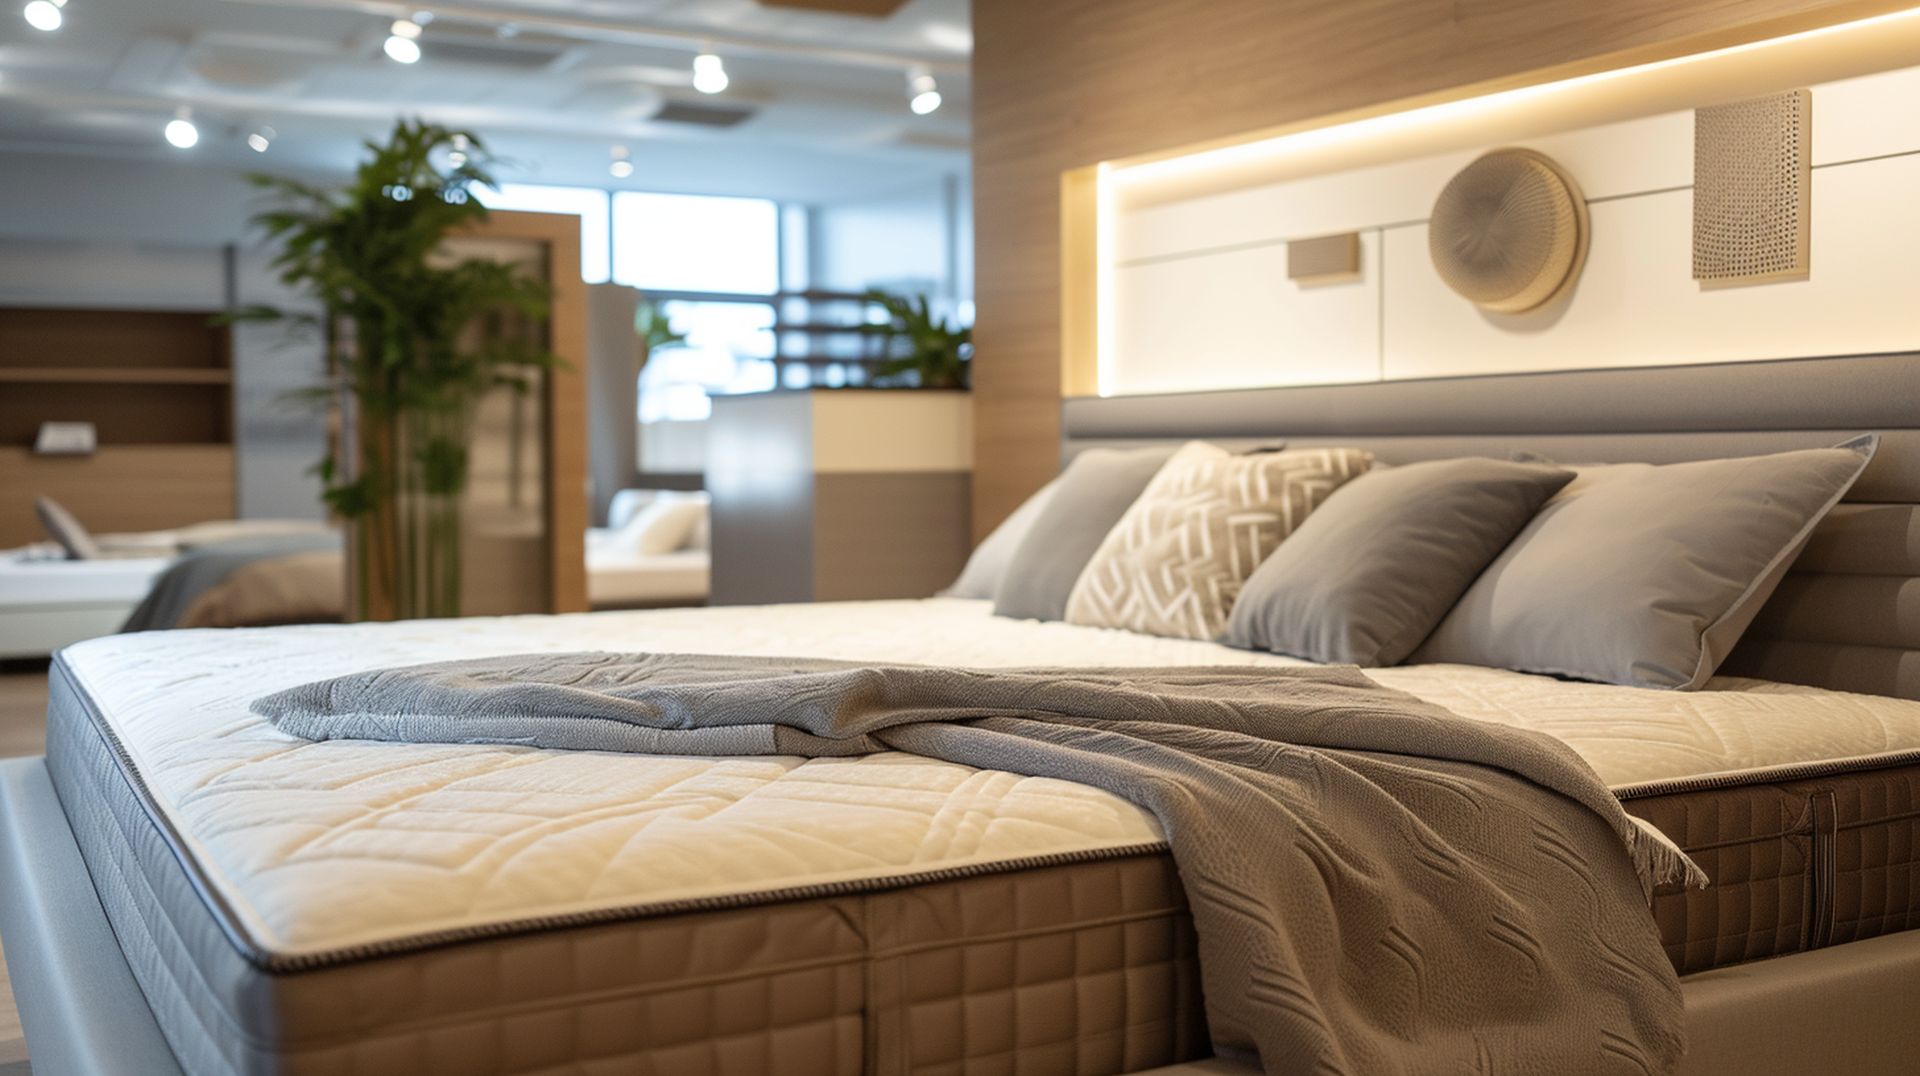 If you're looking for a new bed, mattress stores in New York City offer the best customer and delivery service, financing, and warranties in New York